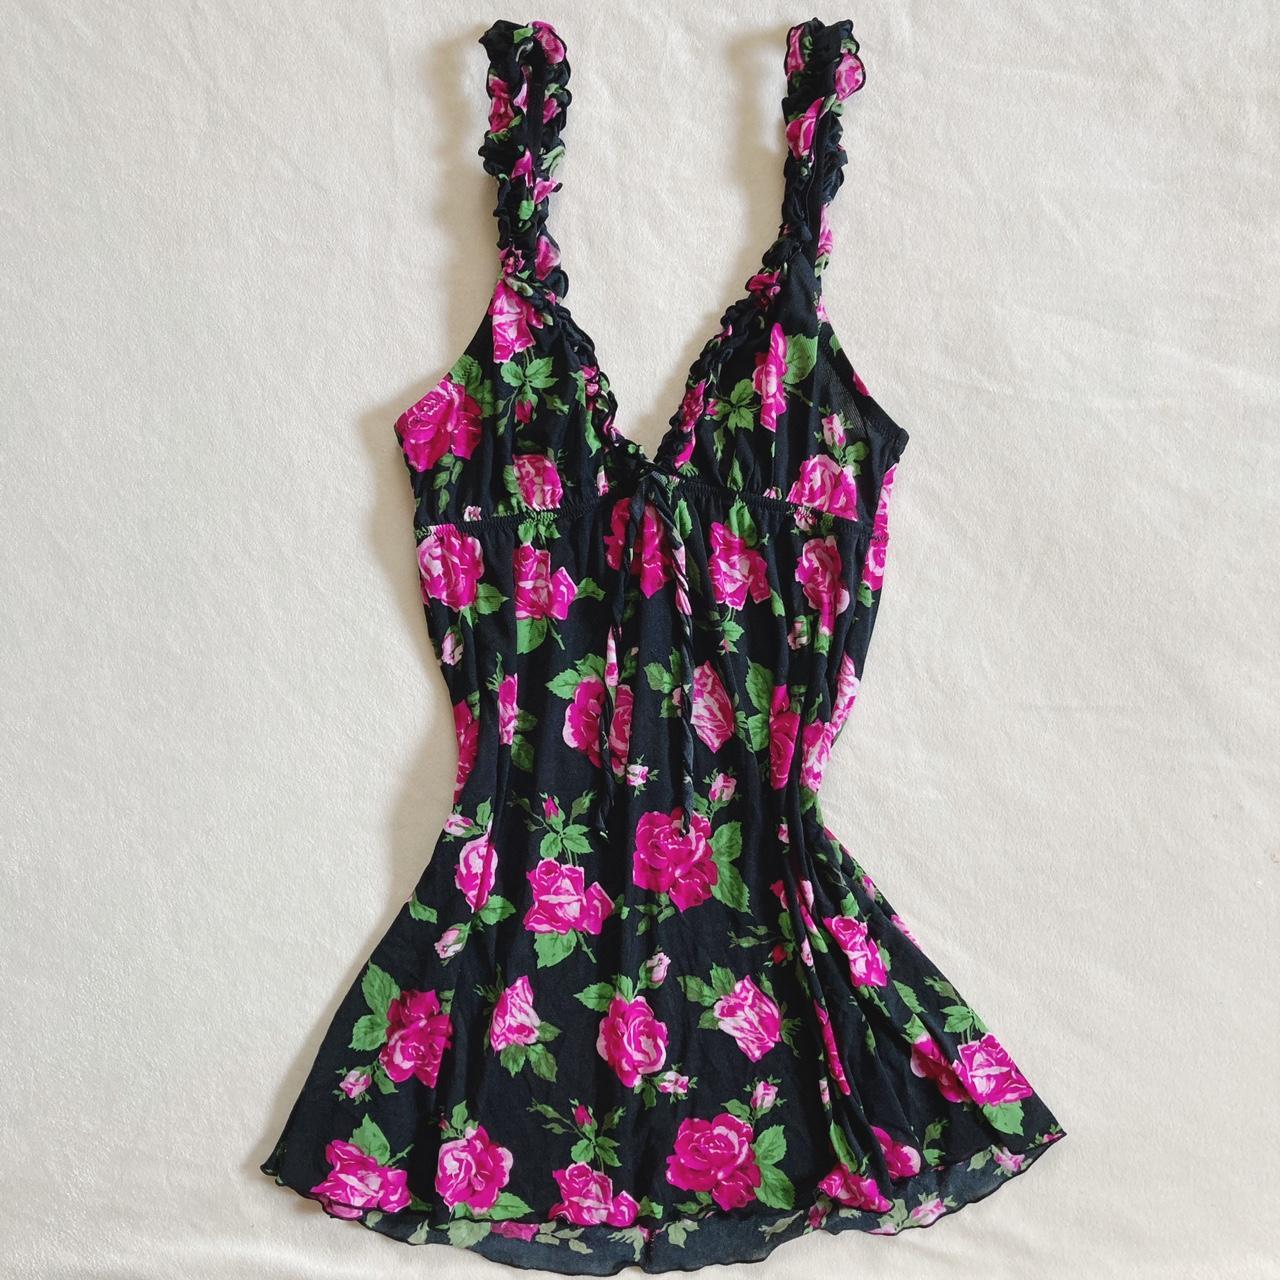 Product Image 1 - Frilly Floral Slip Dress

A gorgeous